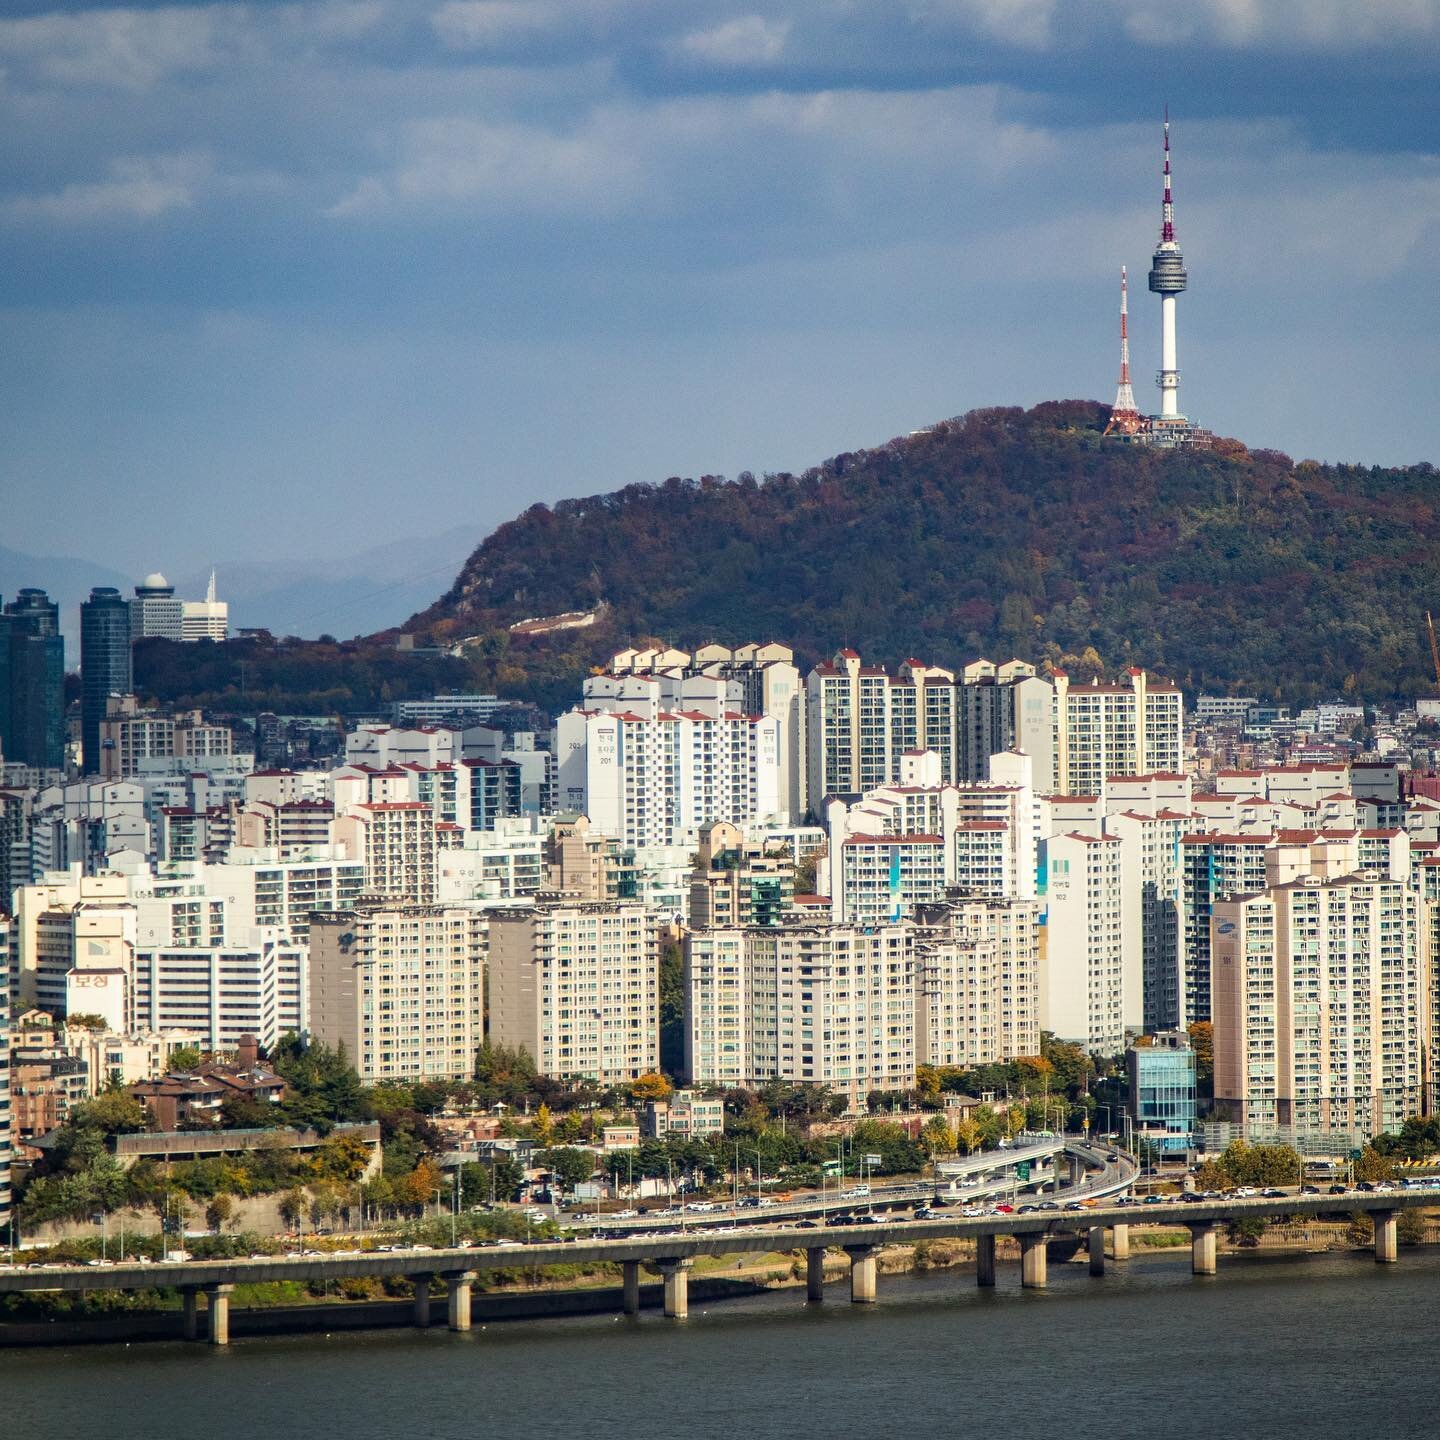 Seoul city view &hellip;.North tower in the background&hellip;.highrise bldgs everywhere&hellip;says 😊🙏
.
.
.
#seoul #southkorea #korea #city #cityphotography #urbanphotography #cityscape #landscape #view #sony #travelphotography #travel #travelgra